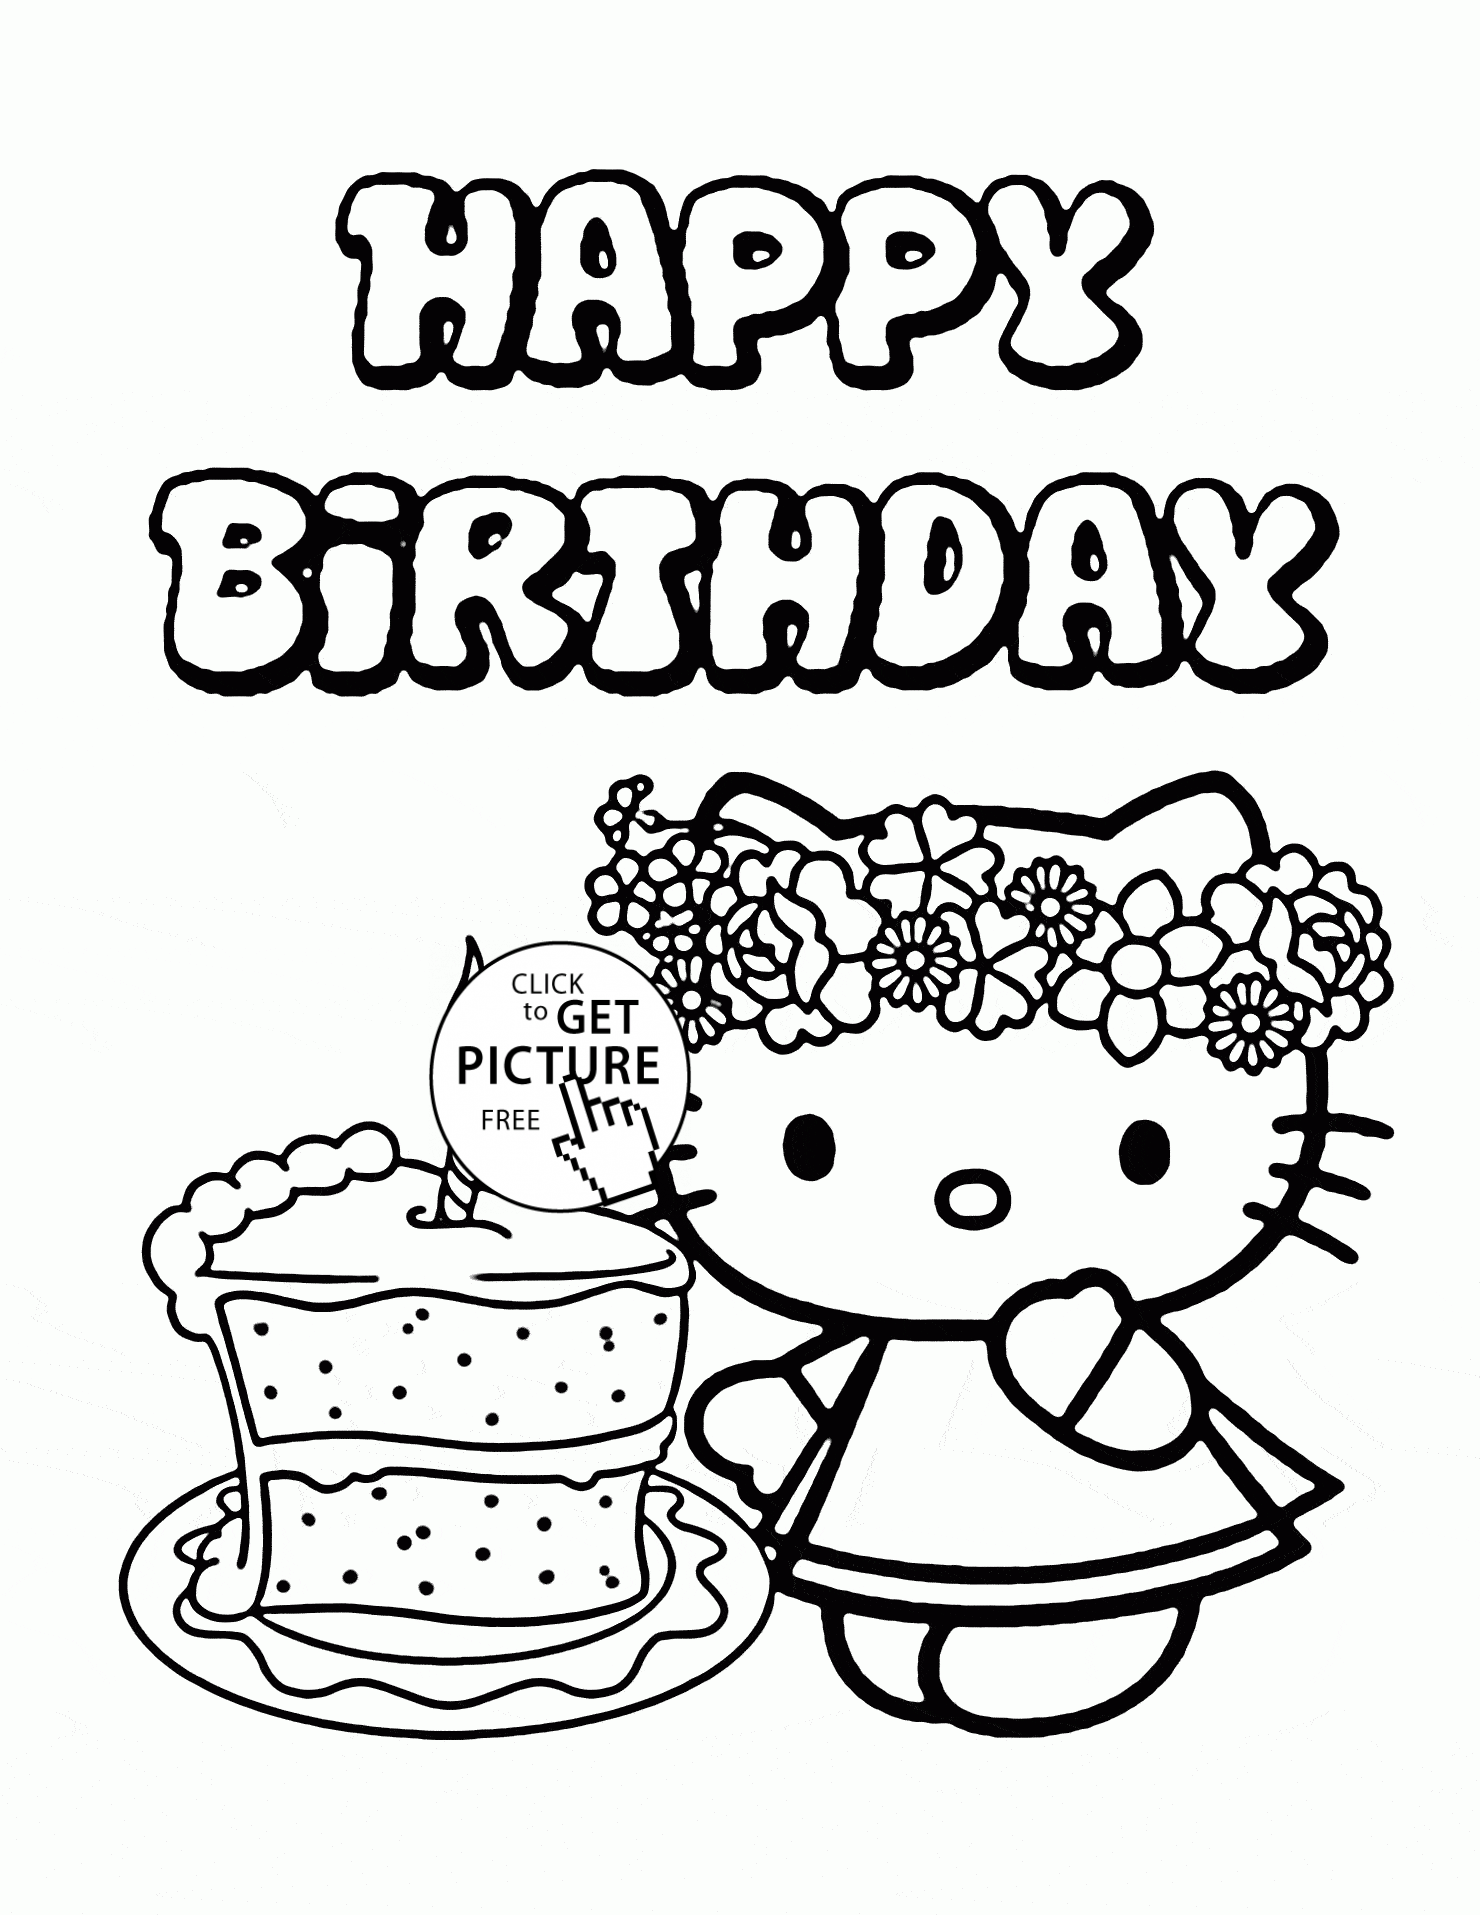 free colouring pages birthday cake cake coloring pages getcoloringpagescom birthday cake pages colouring free 